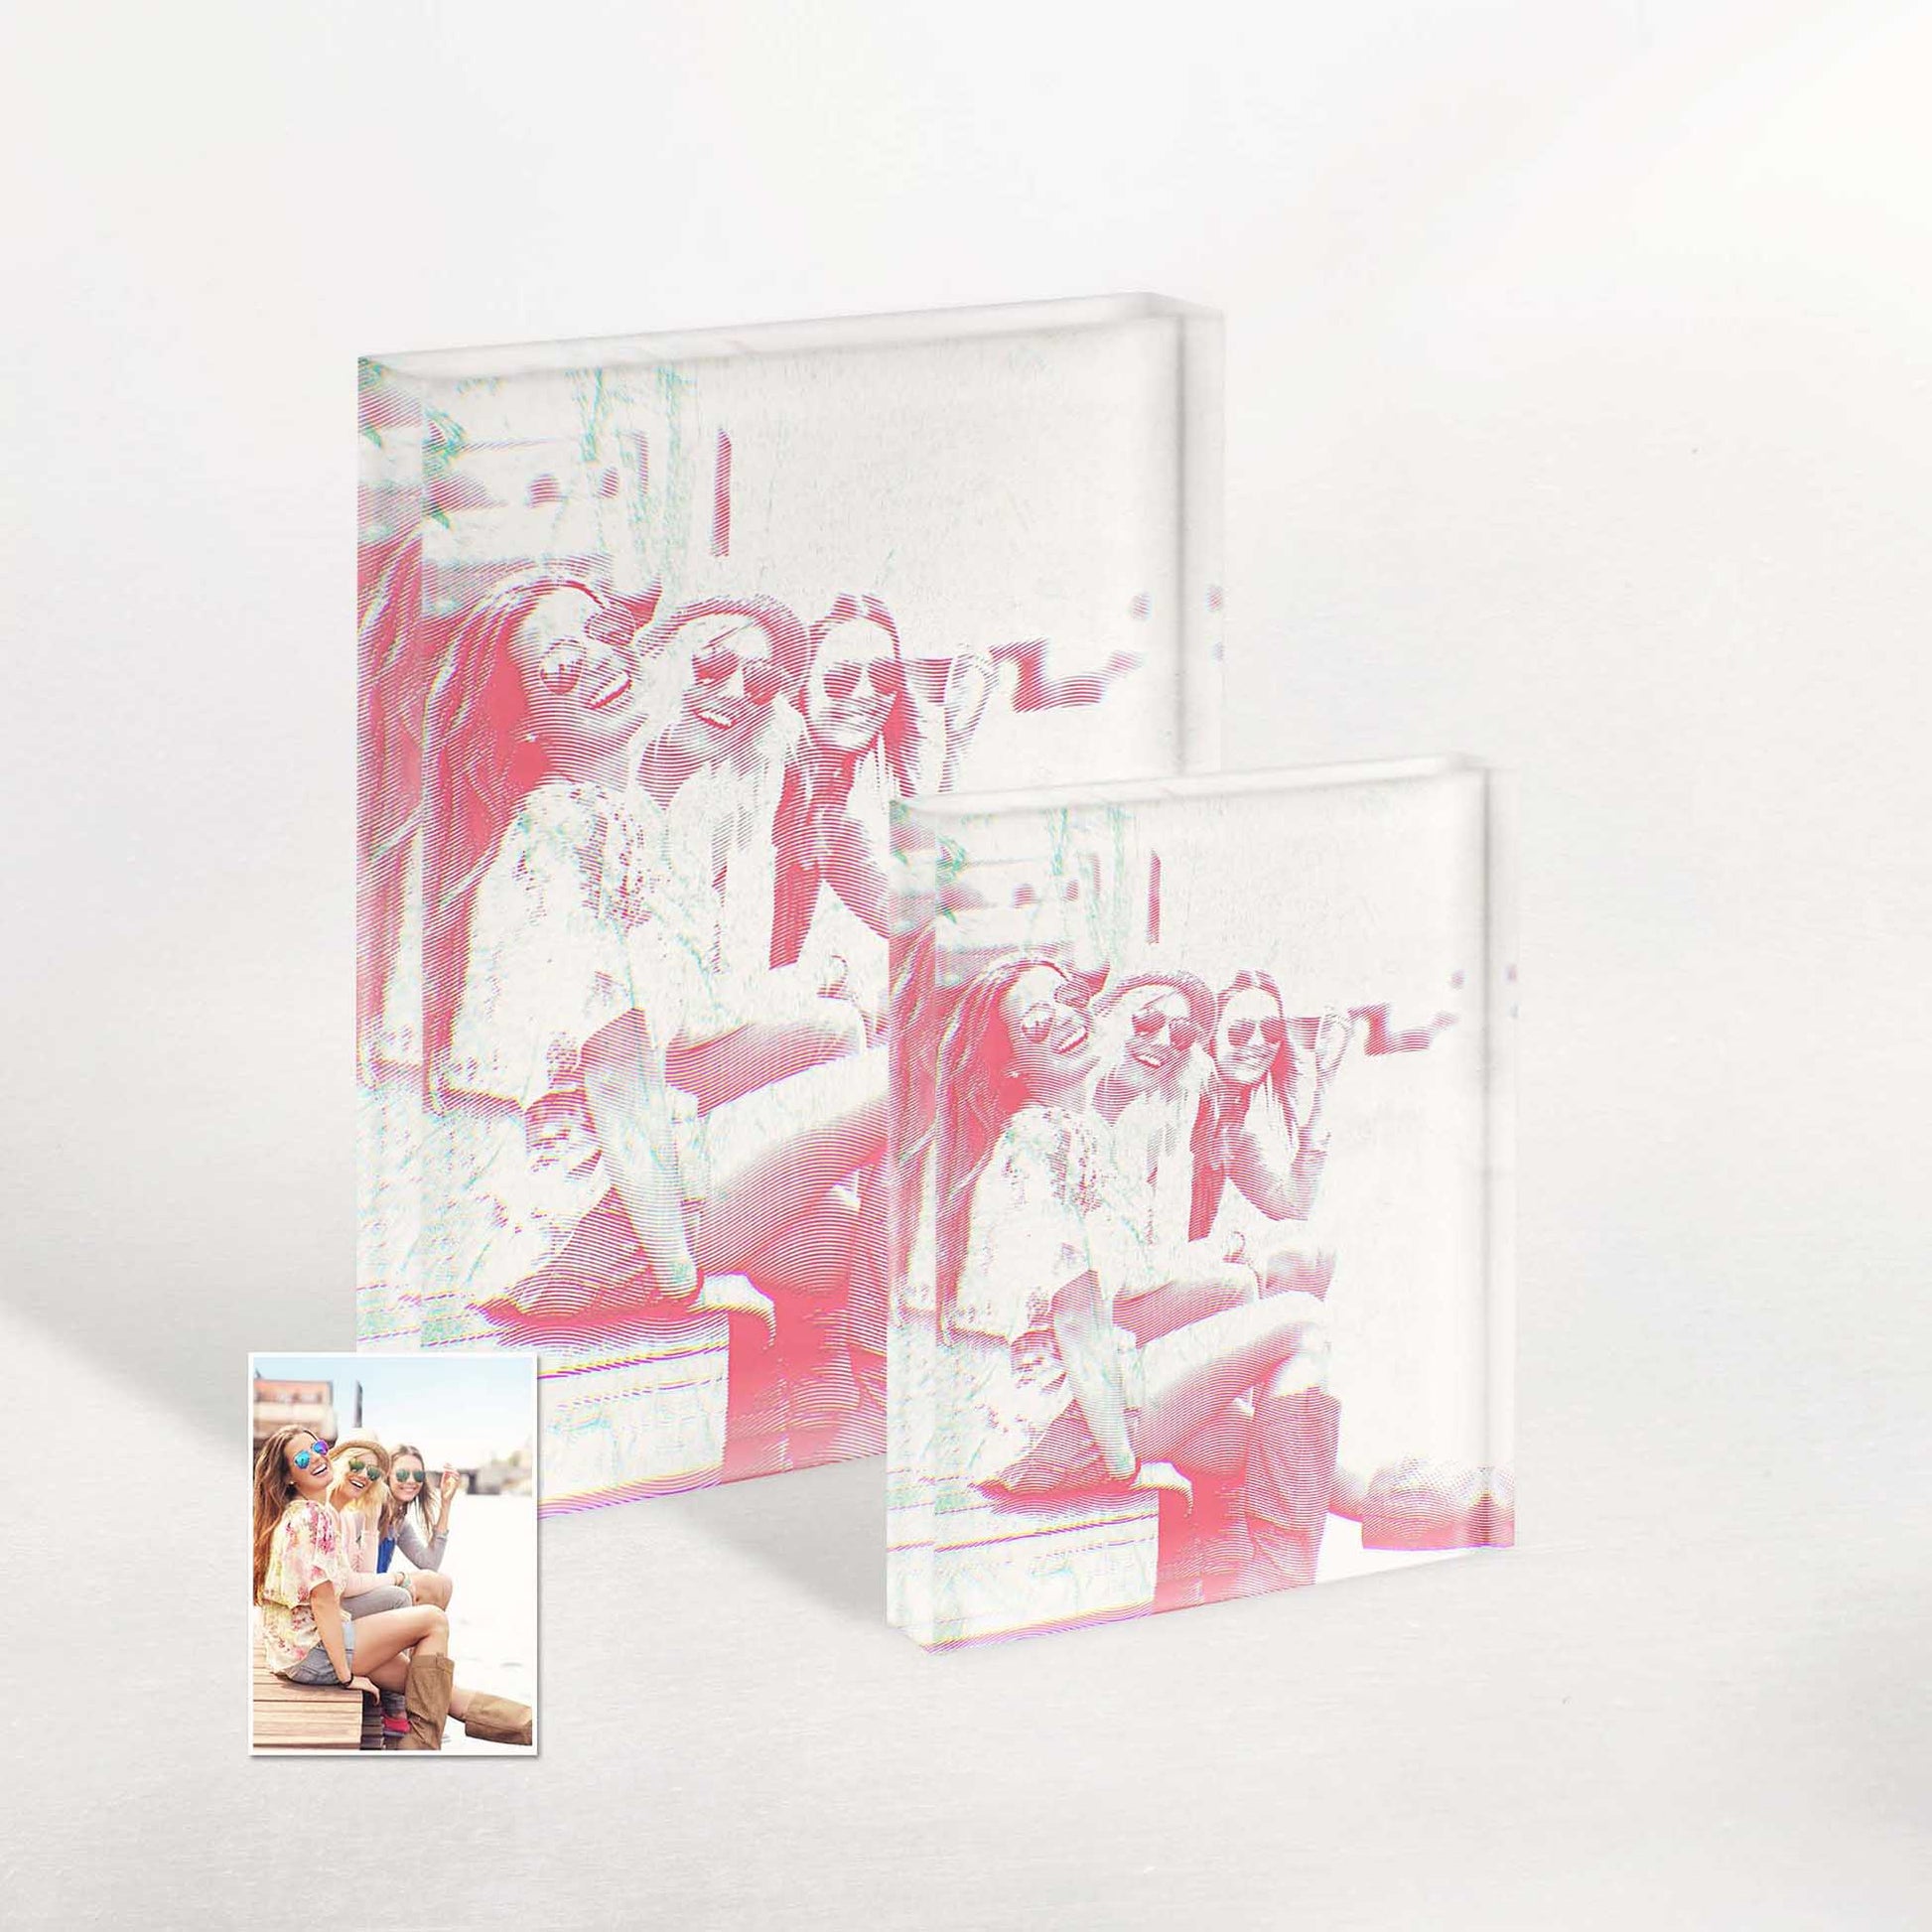 Surprise your loved ones with our Personalised Pink Engraving Acrylic Block Photo. Its sleek and minimalist aesthetic adds a stylish touch to any space, making it a trendy and cool gift choice